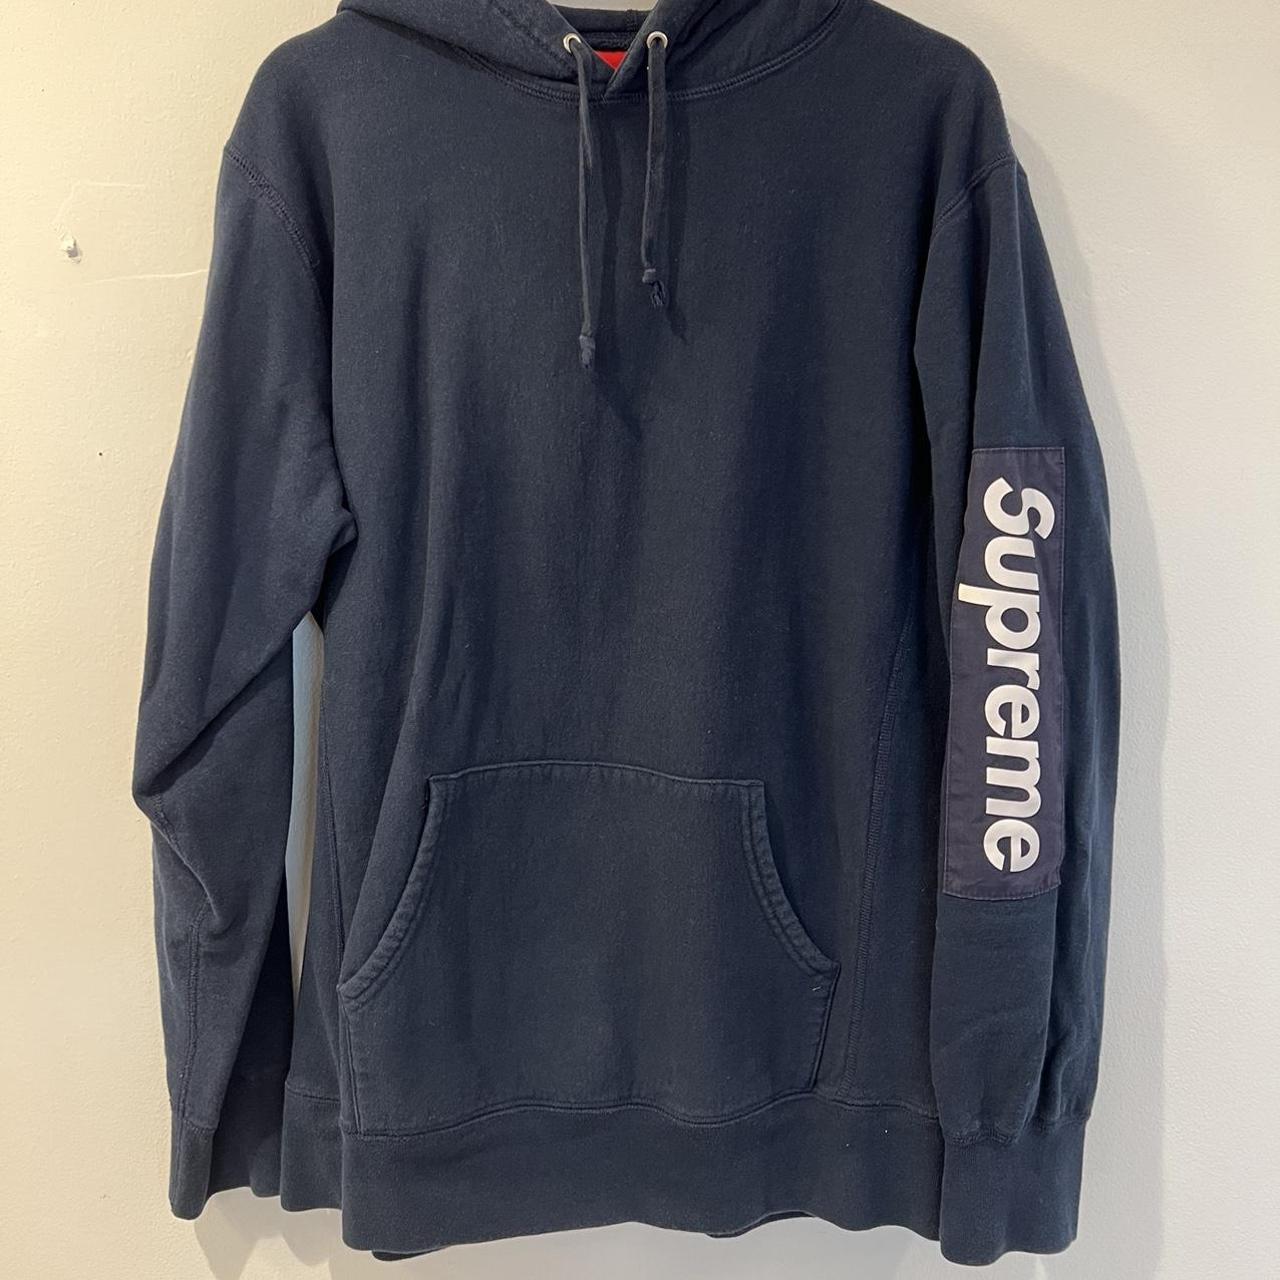 Used Supreme Sleeve Patch Hooded Sweatshirt from S/S... - Depop